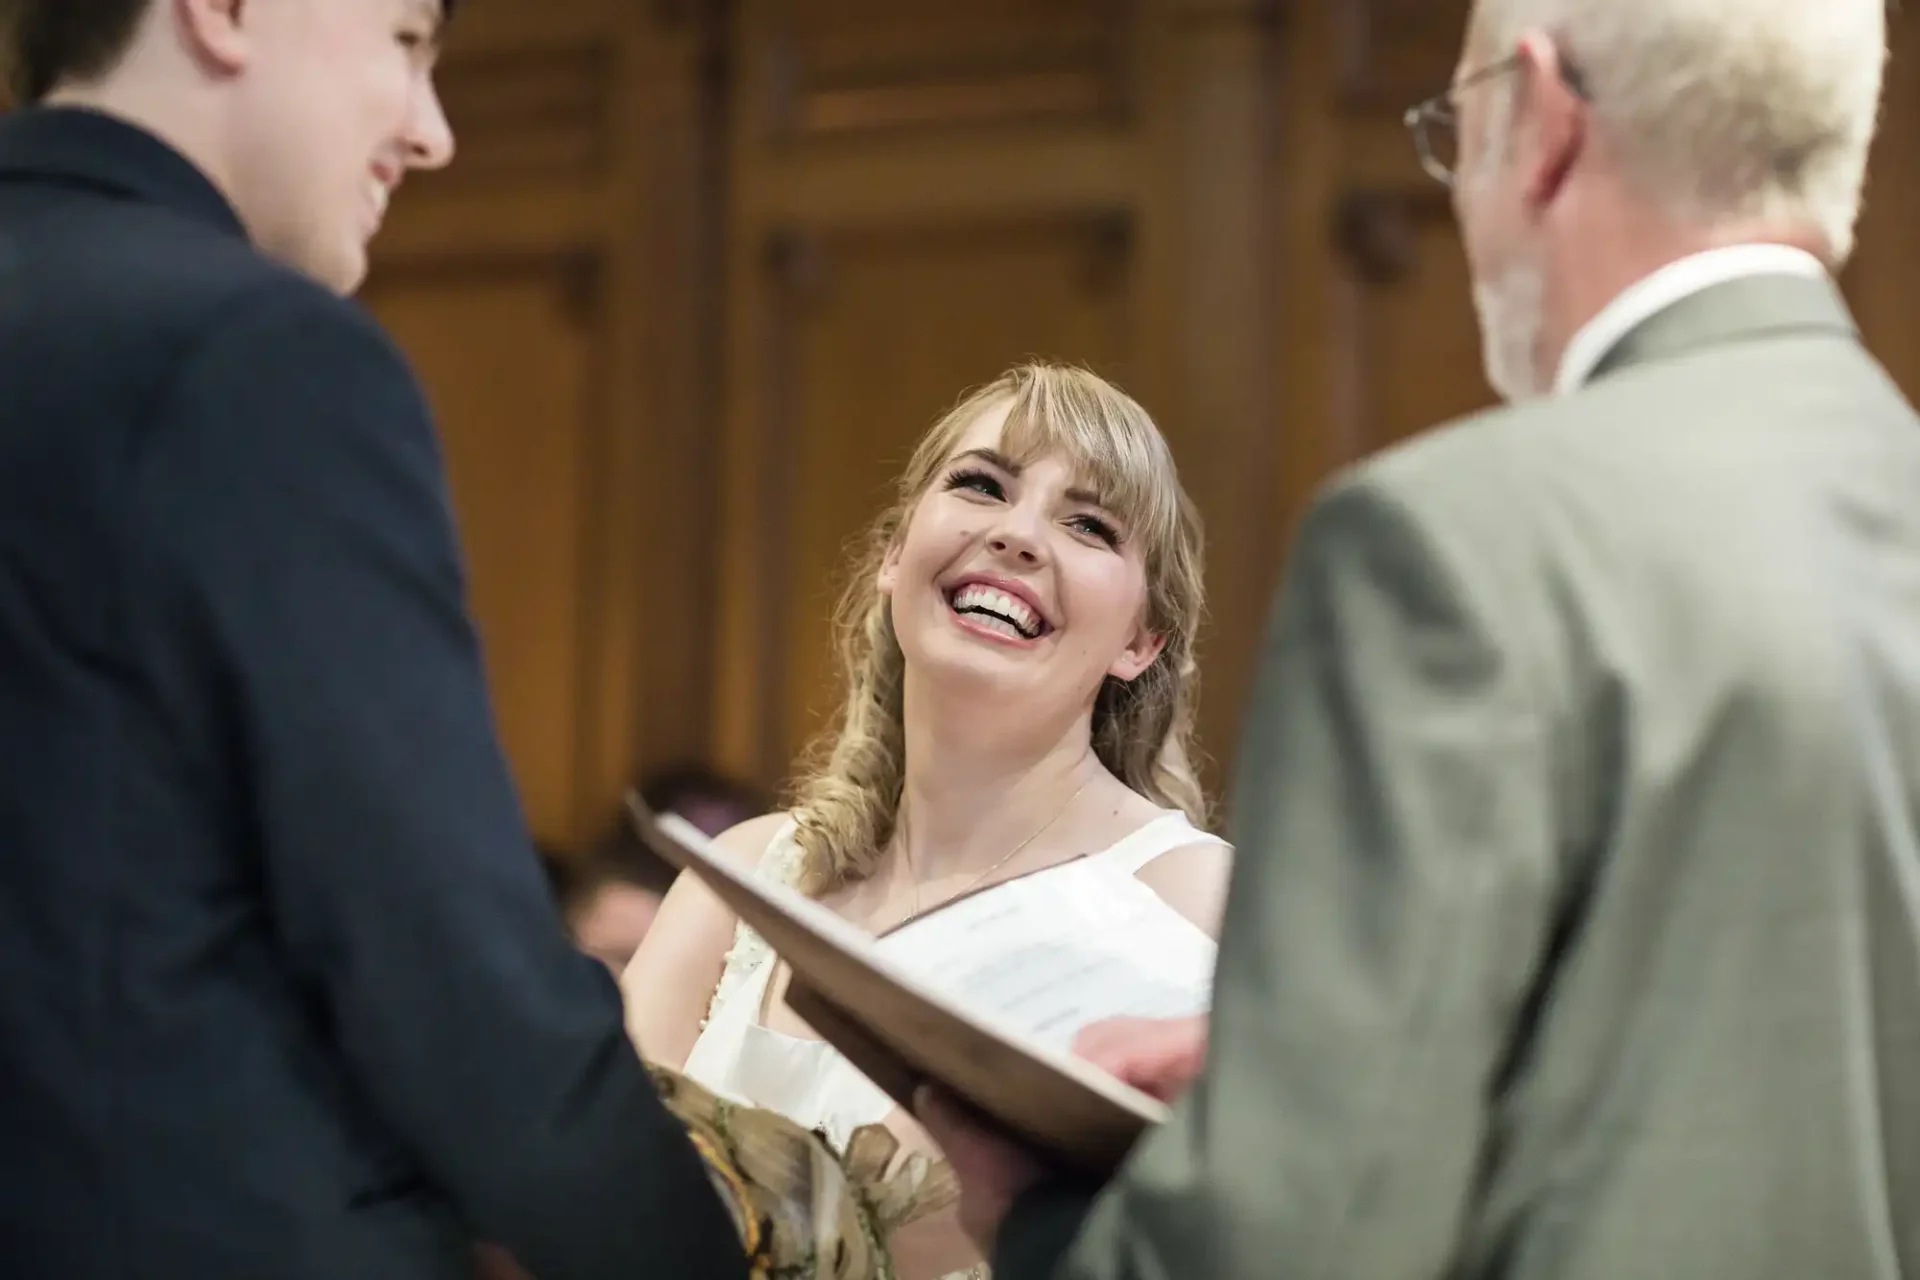 A young woman with a joyful expression receives a certificate from an older man as another man watches in a formal indoor setting.